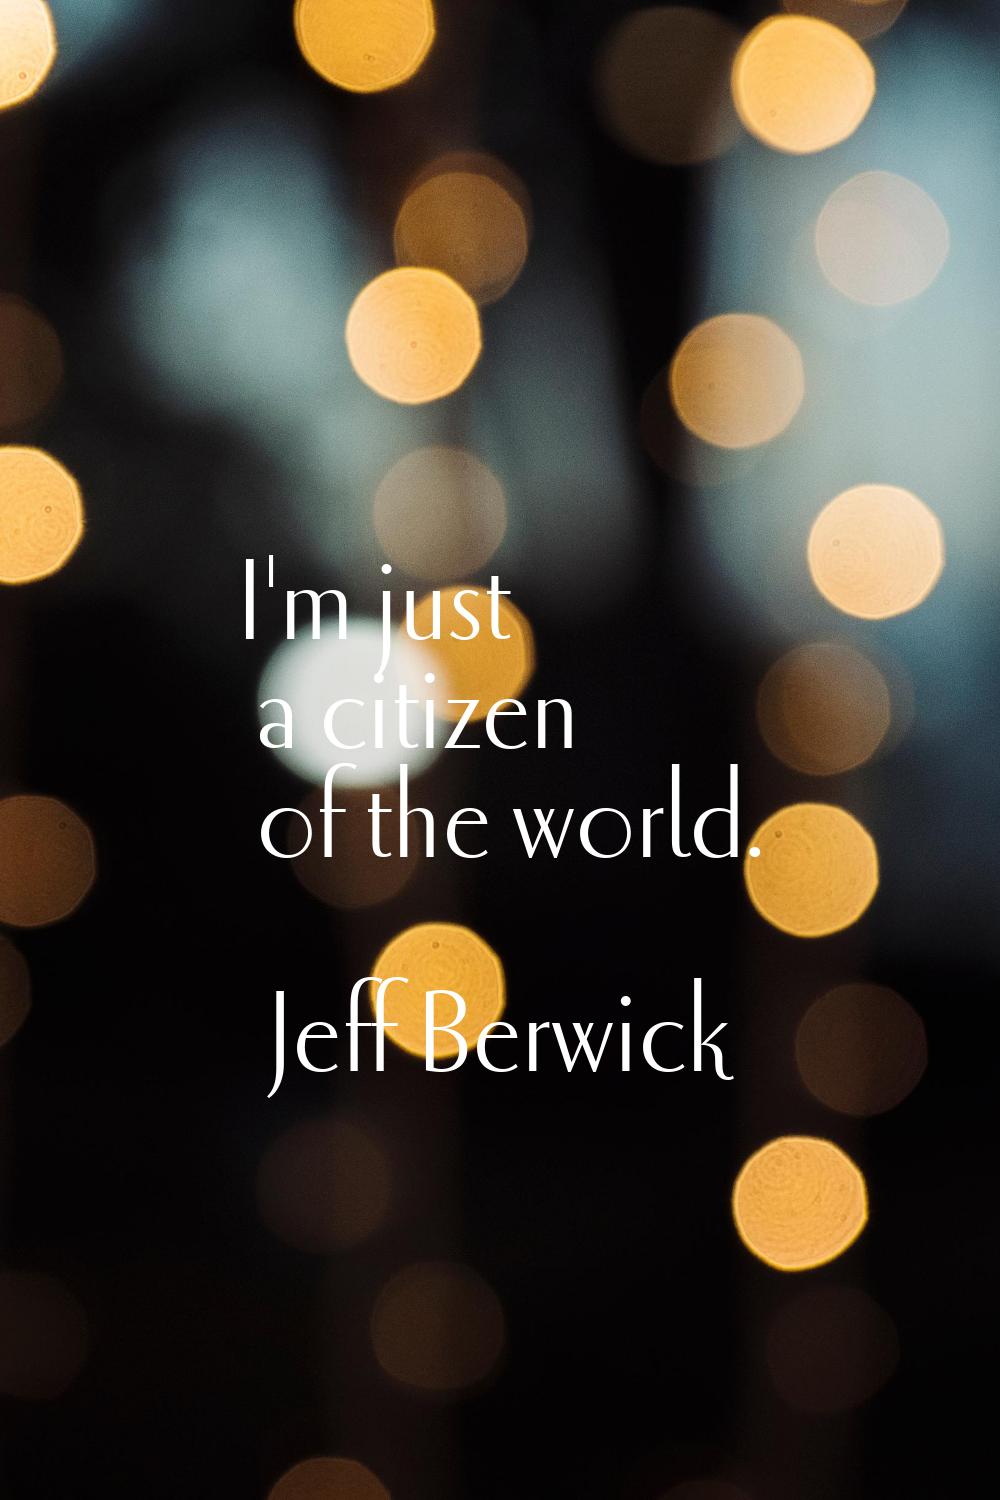 I'm just a citizen of the world.